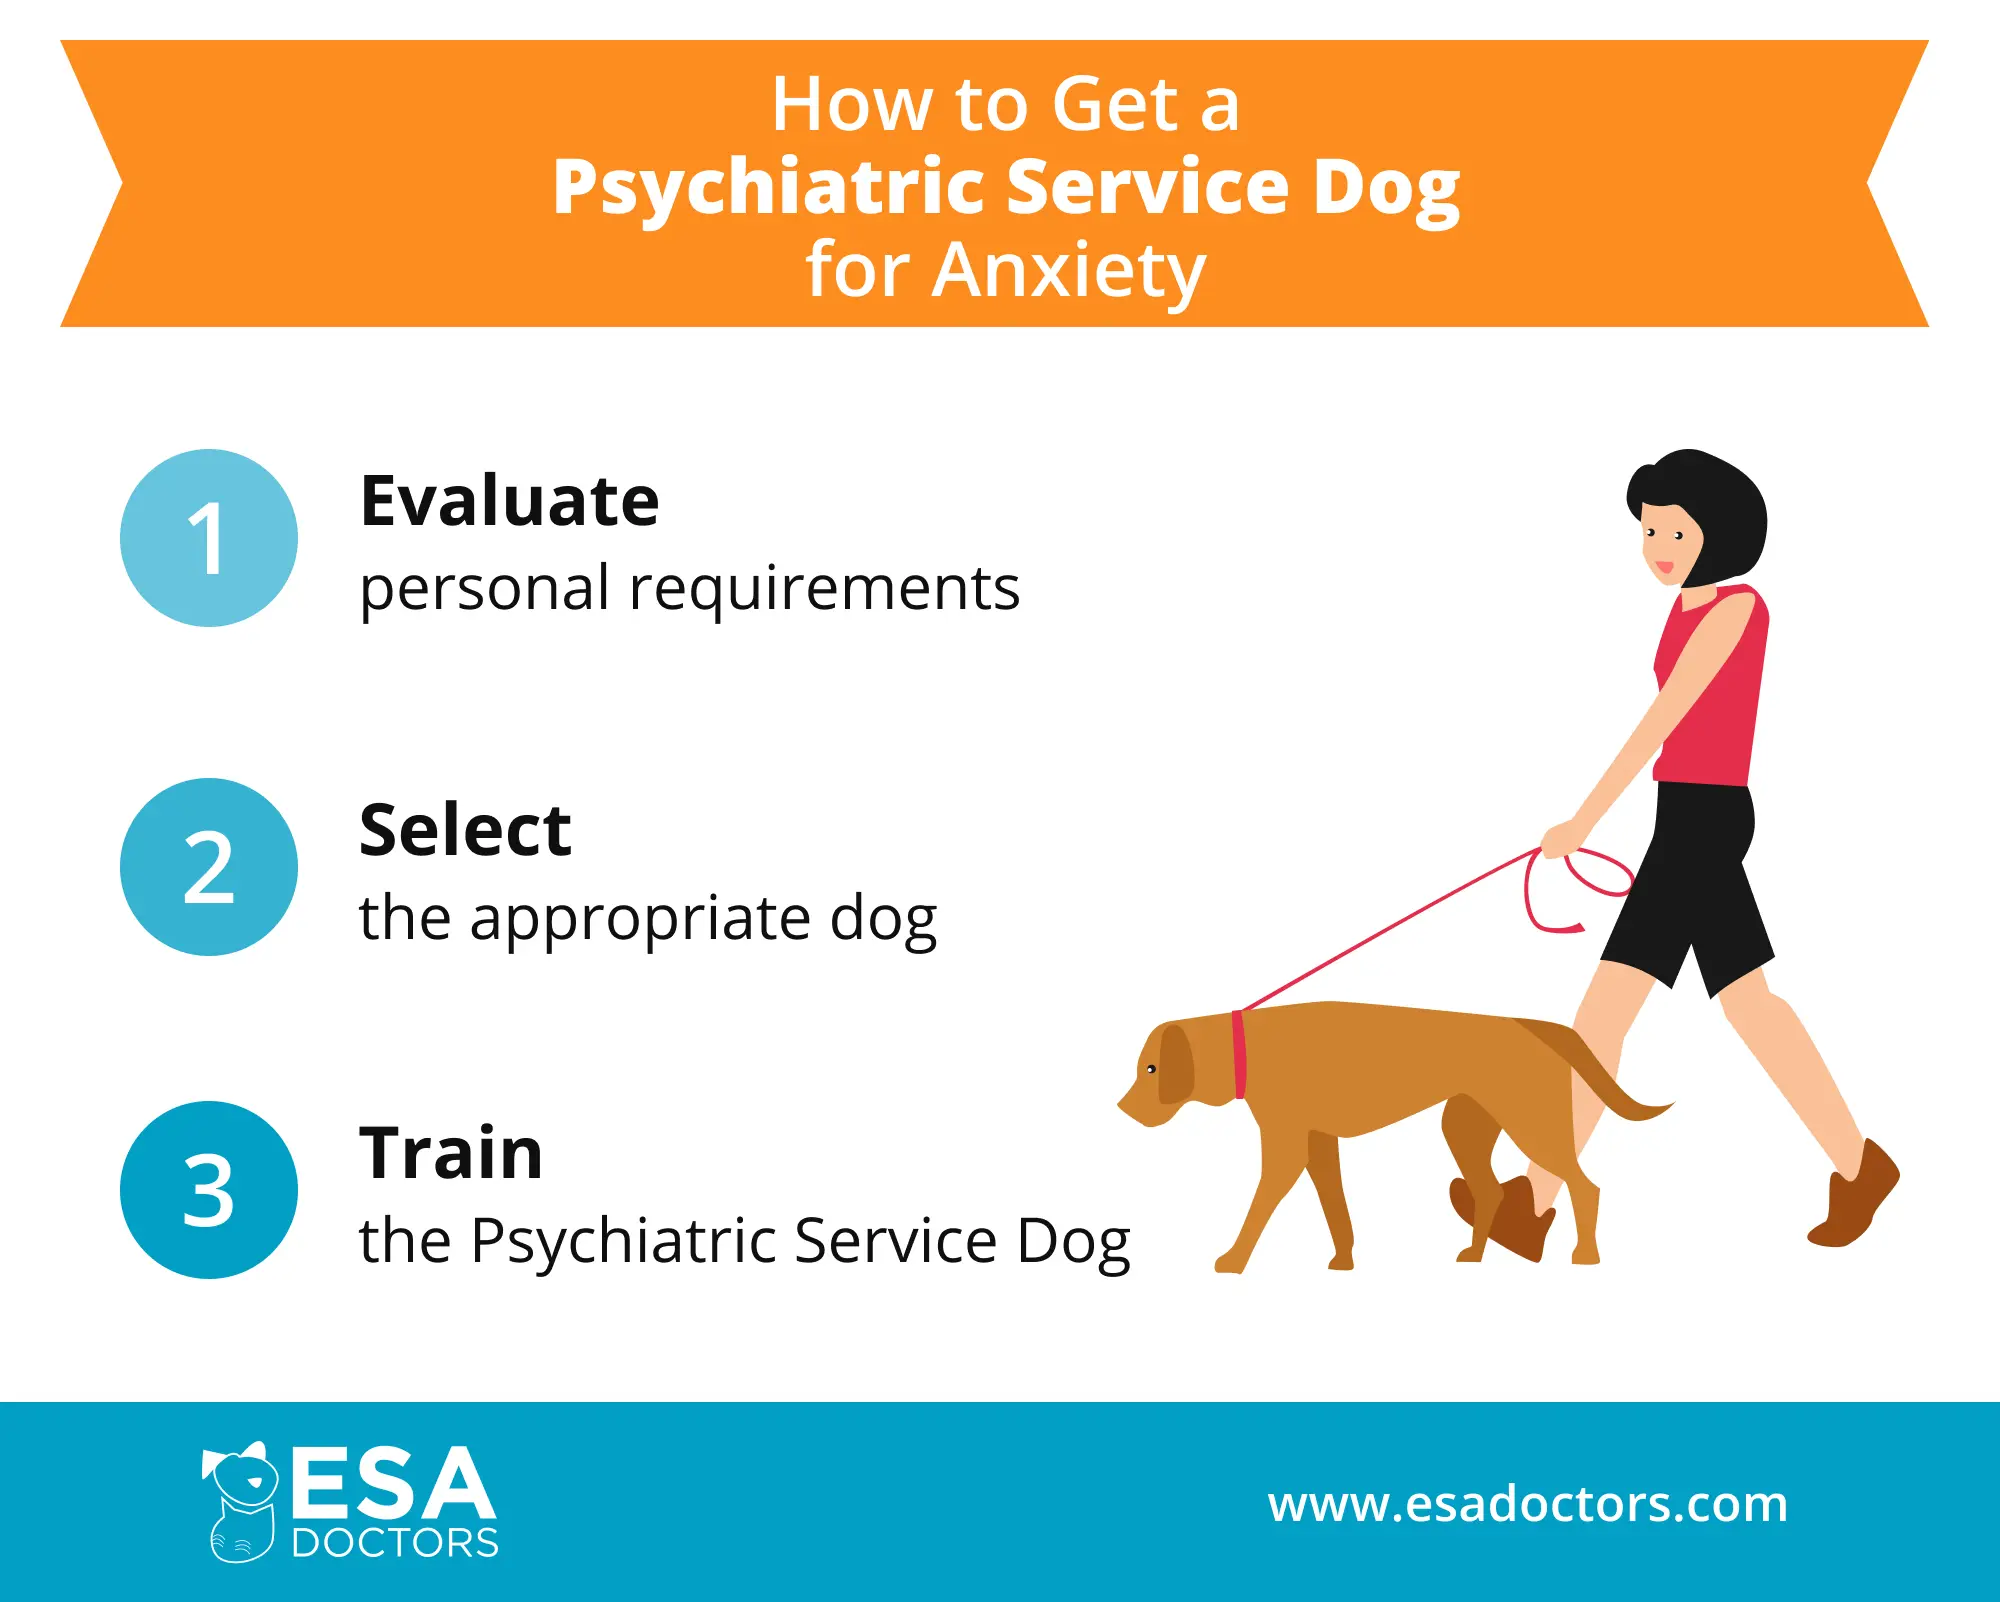 How to Get a Psychiatric Service Dog for Anxiety